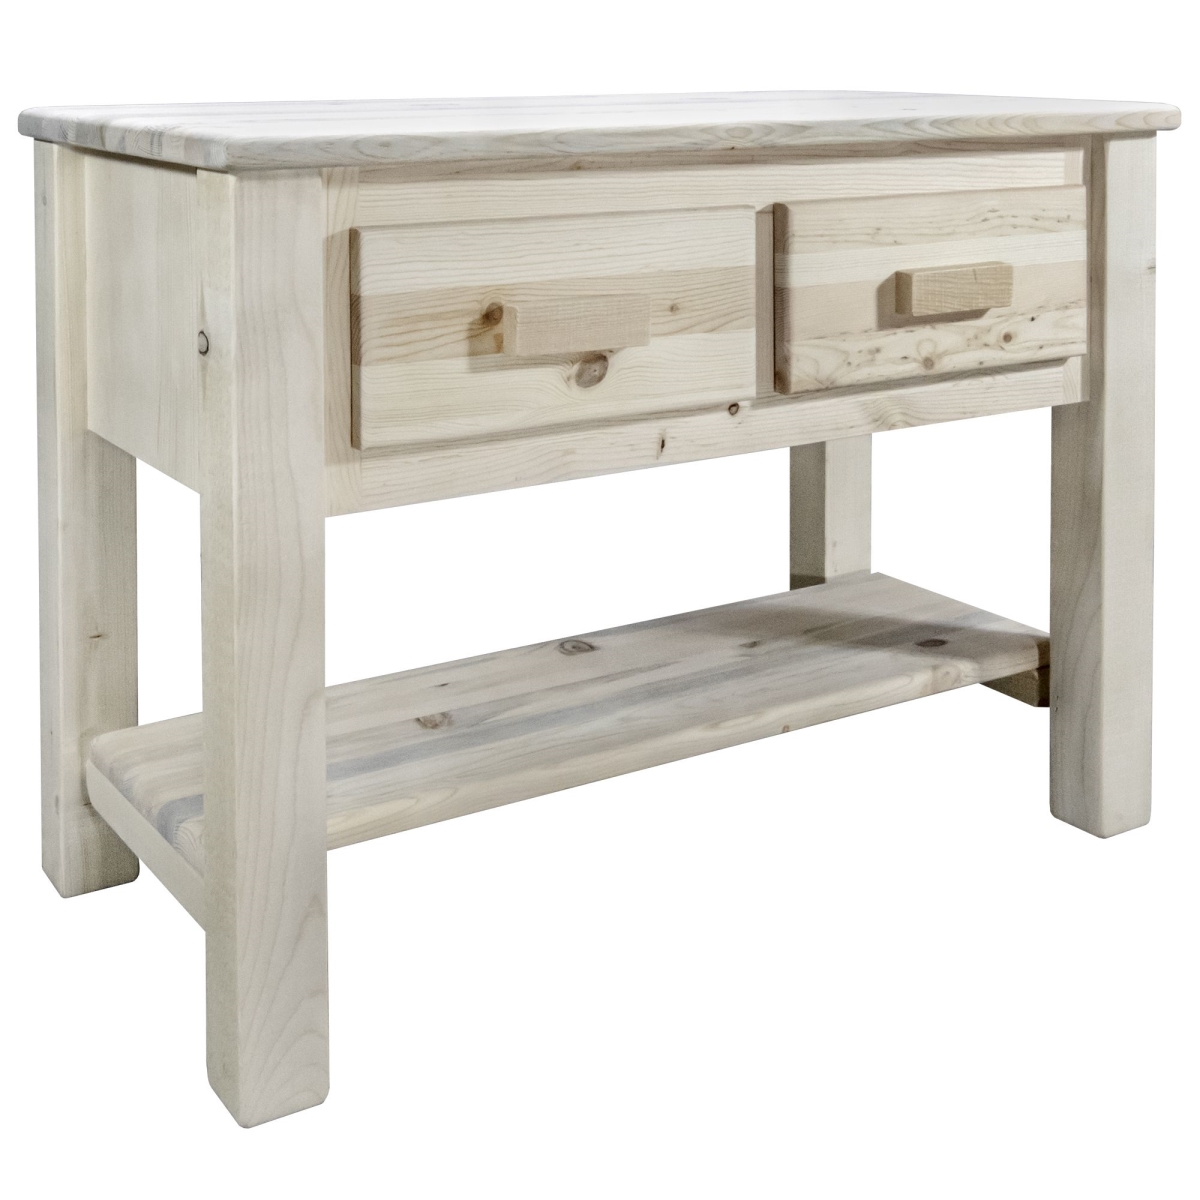 Mwhccontblw2dr Homestead Collection Console Table With 2 Drawers - 5.5 X 11.75 X 10.5 In.